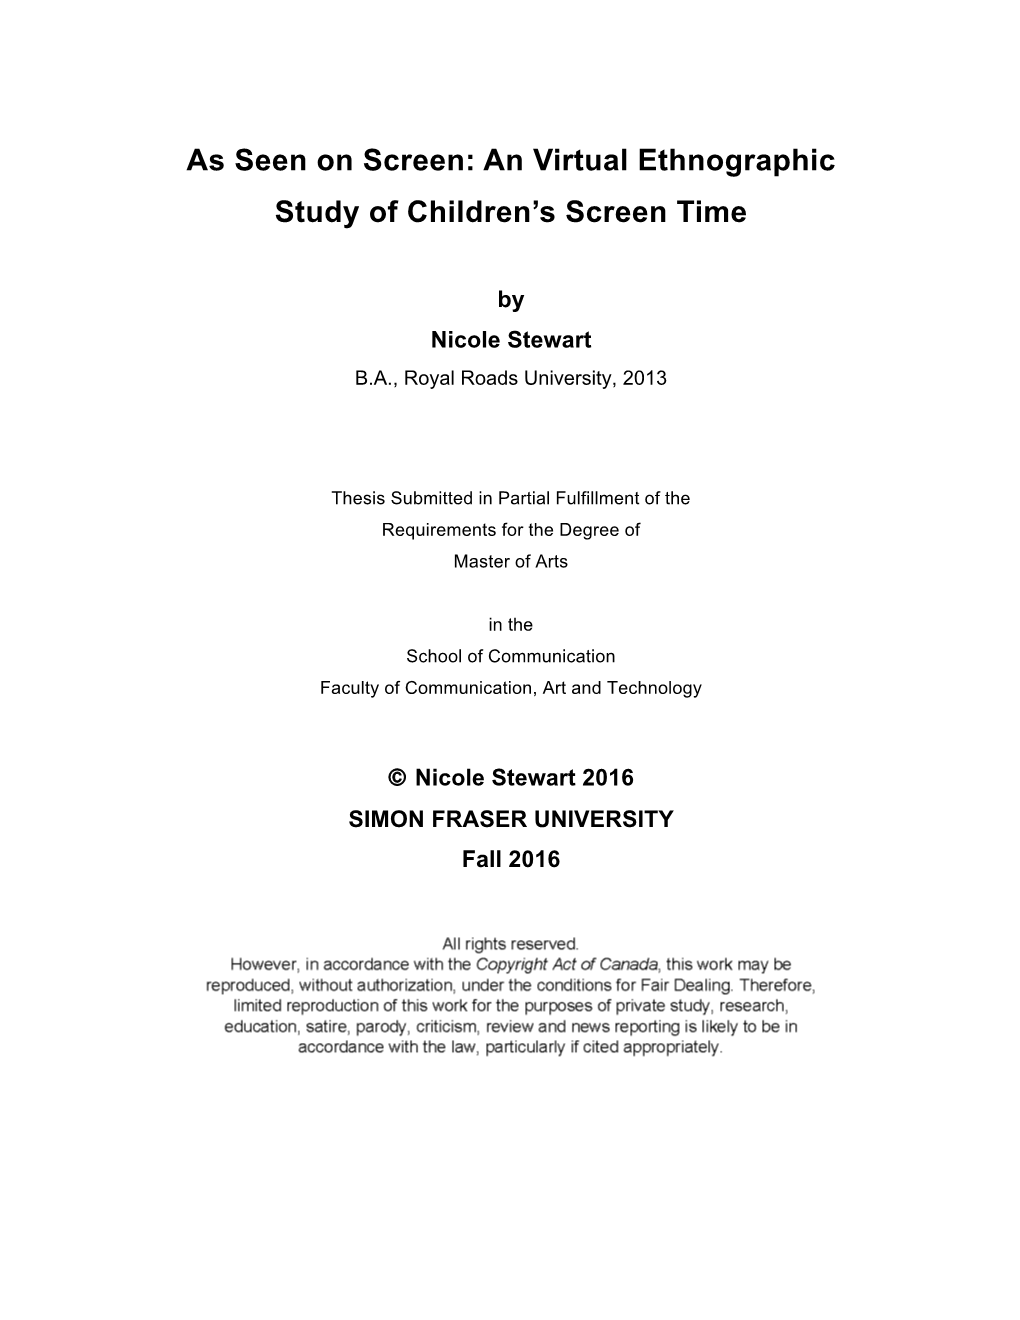 An Virtual Ethnographic Study of Children's Screen Time